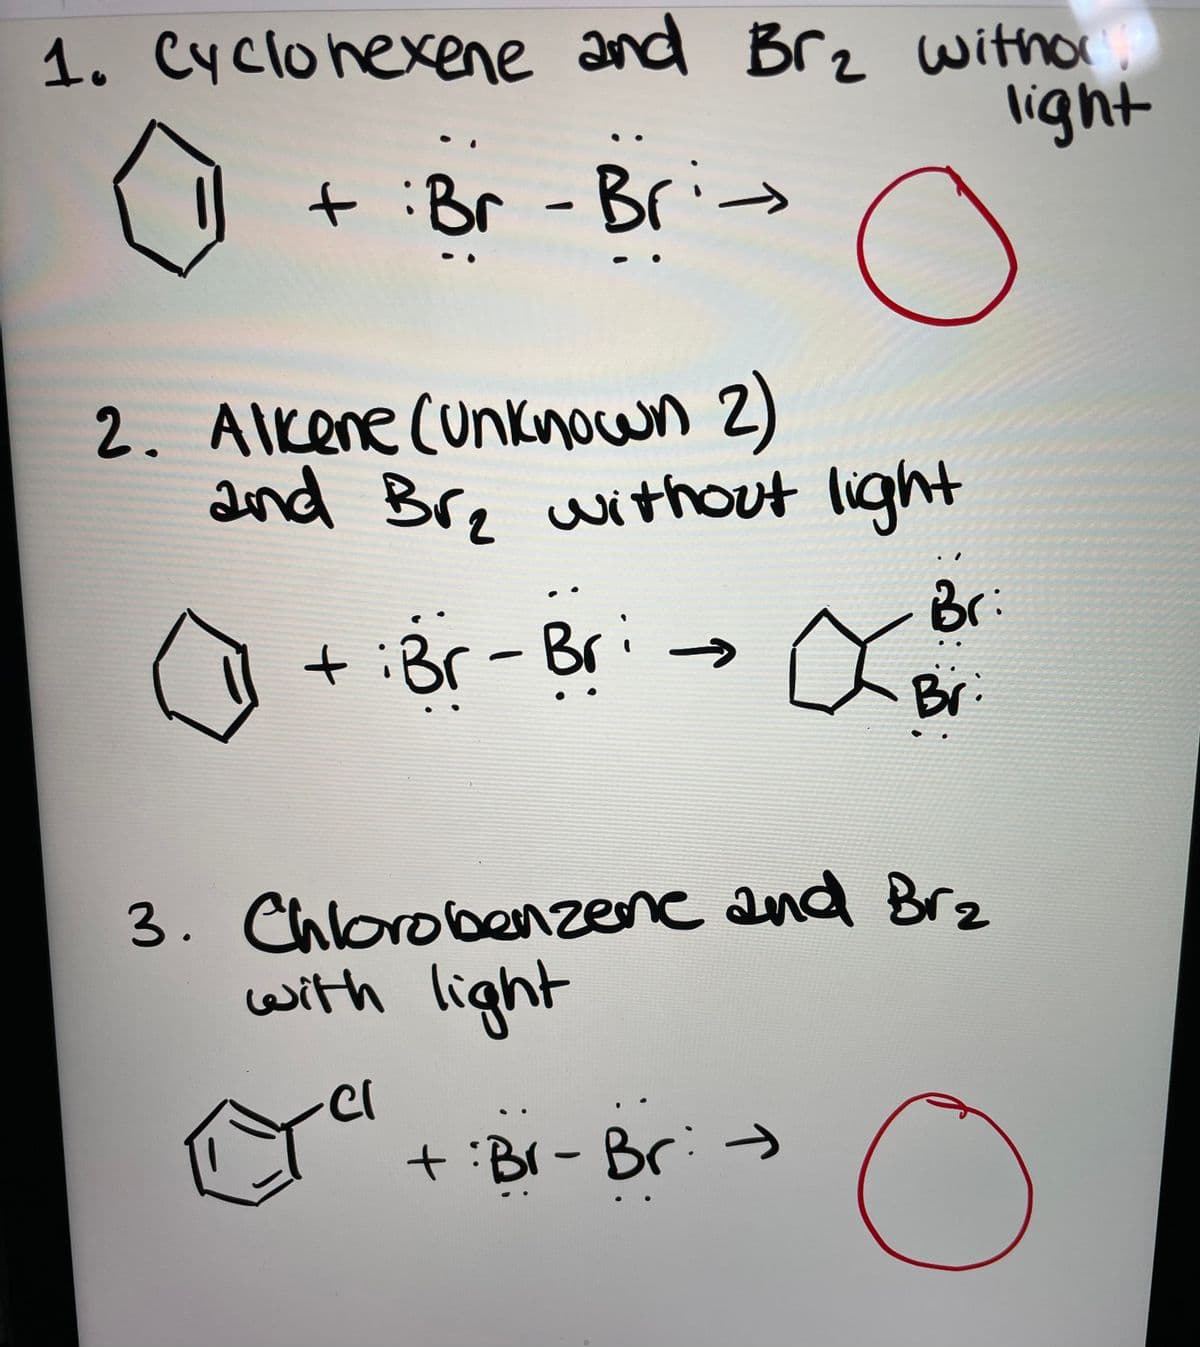 1. rz withor.
light
Cyclonexene and Br
+ :Br -Bri-
2. Alkene cunknocwn 2)
and Br, without light
Br:
+ iBr-Bri
->
Br
3. Chlorolbenzene and Brz
with light
Bri
t
